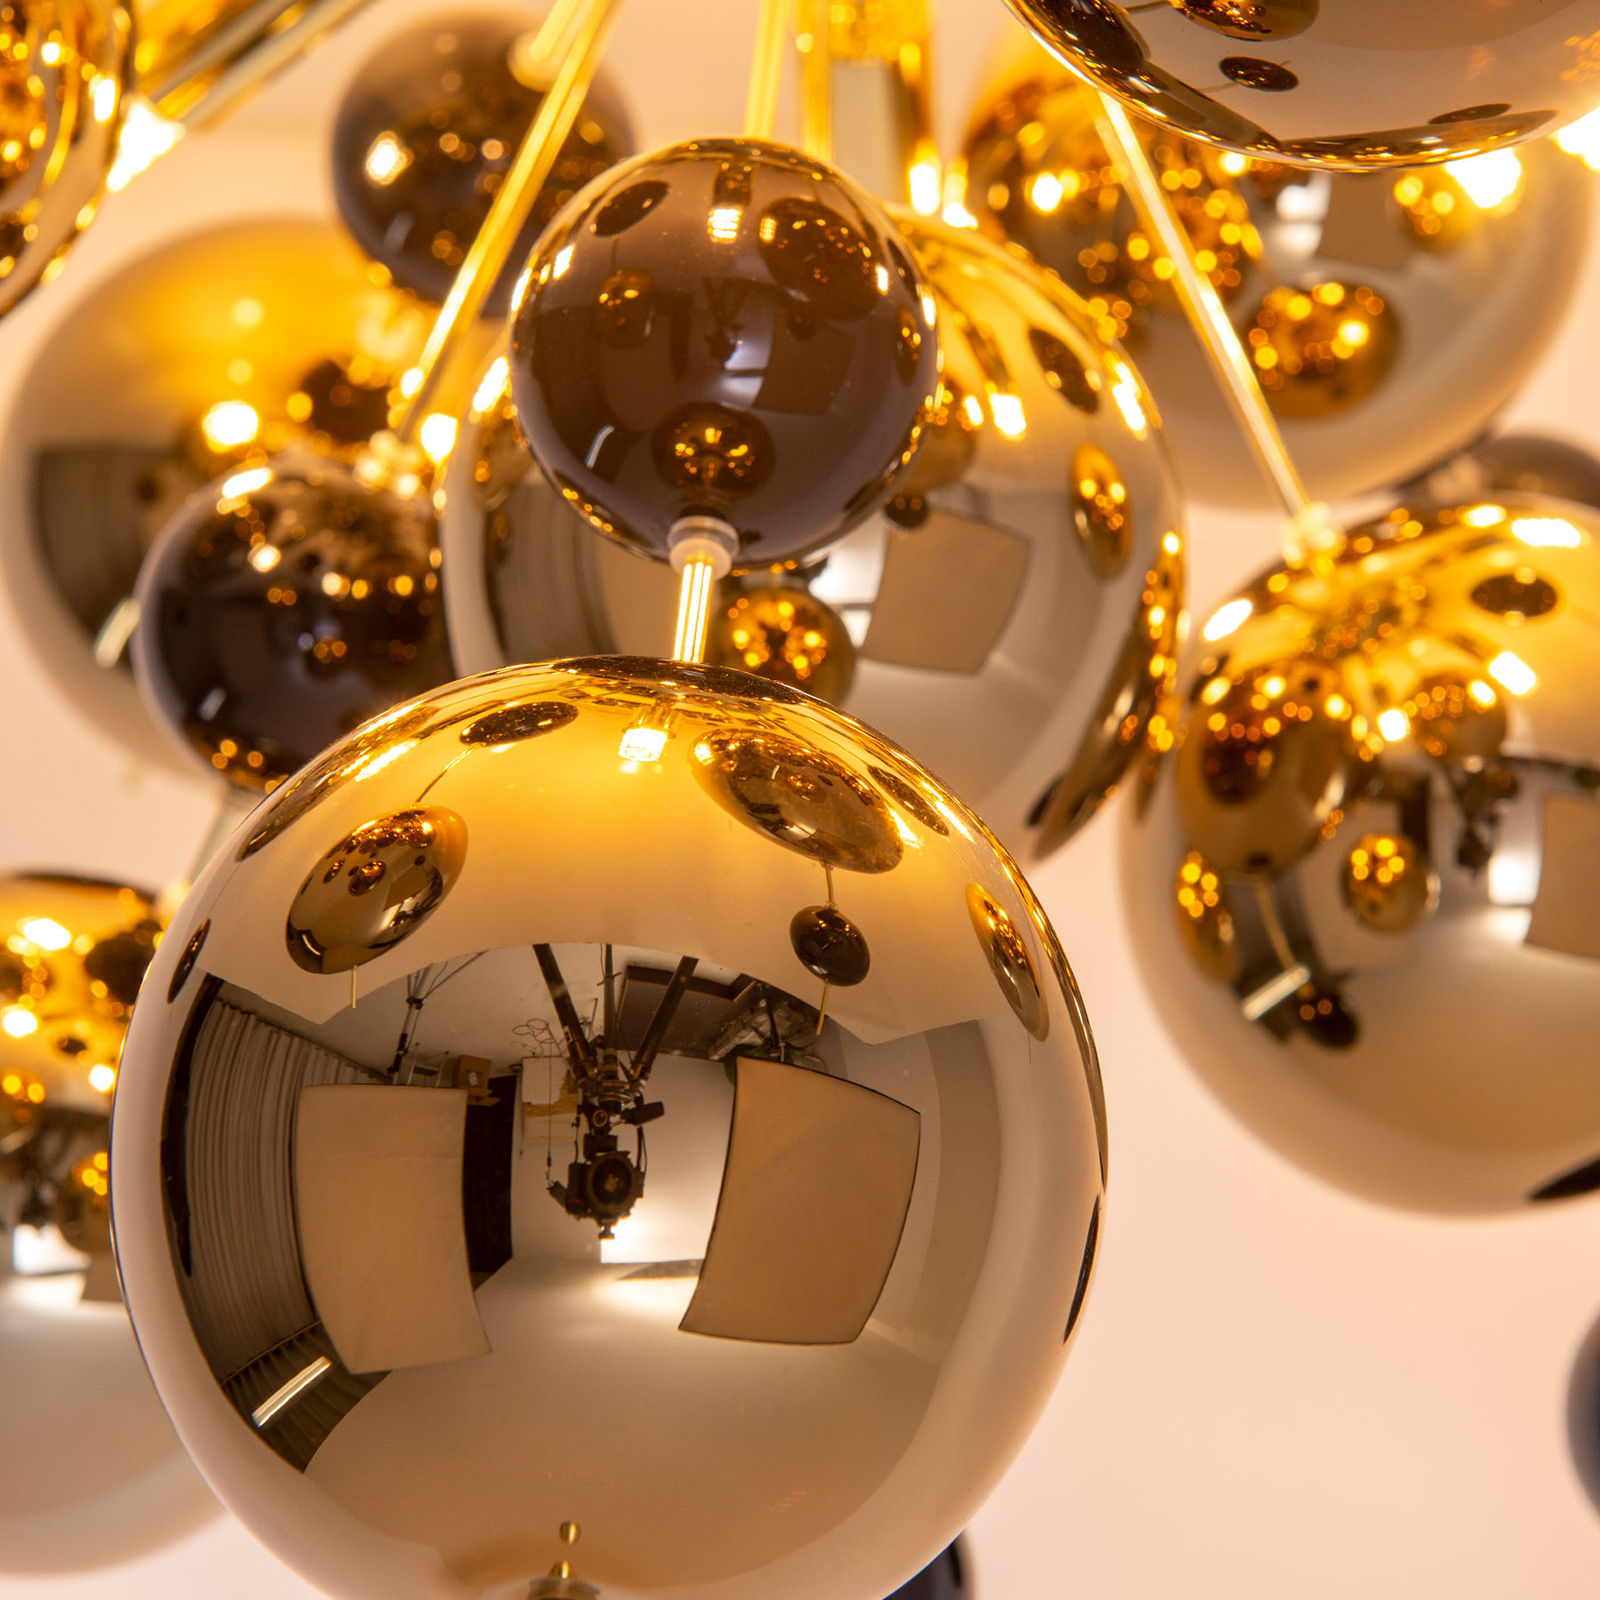 Explosion ceiling light with golden globes